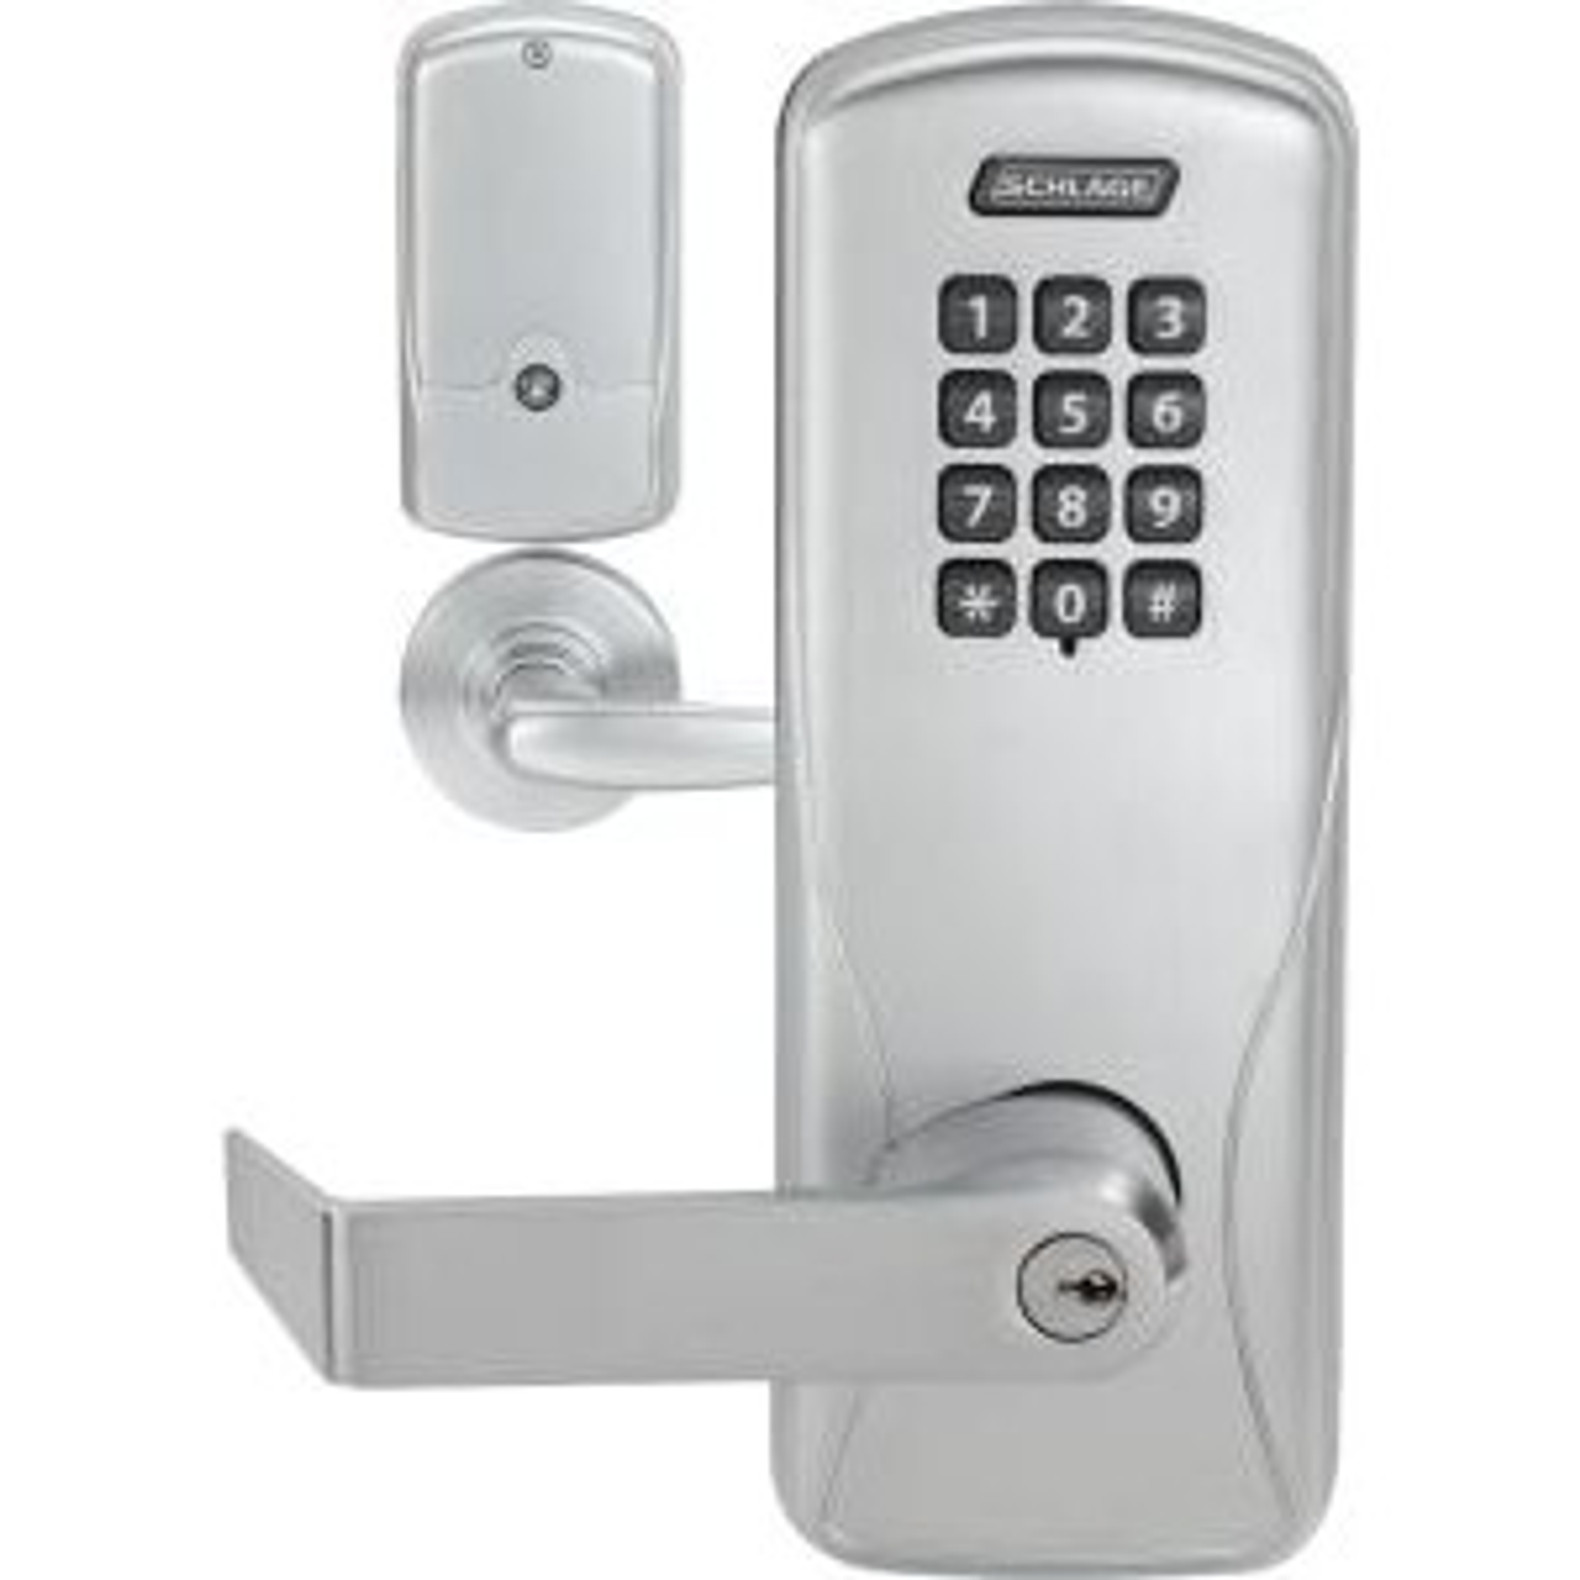 Schlage Electronics CO100CY70 KP RHO 626 JDCO6 CO-100 Standalone Classroom Electronic Cylindrical Lock Keypad Reader, Rhodes Lever, LFIC, Satin Chrome